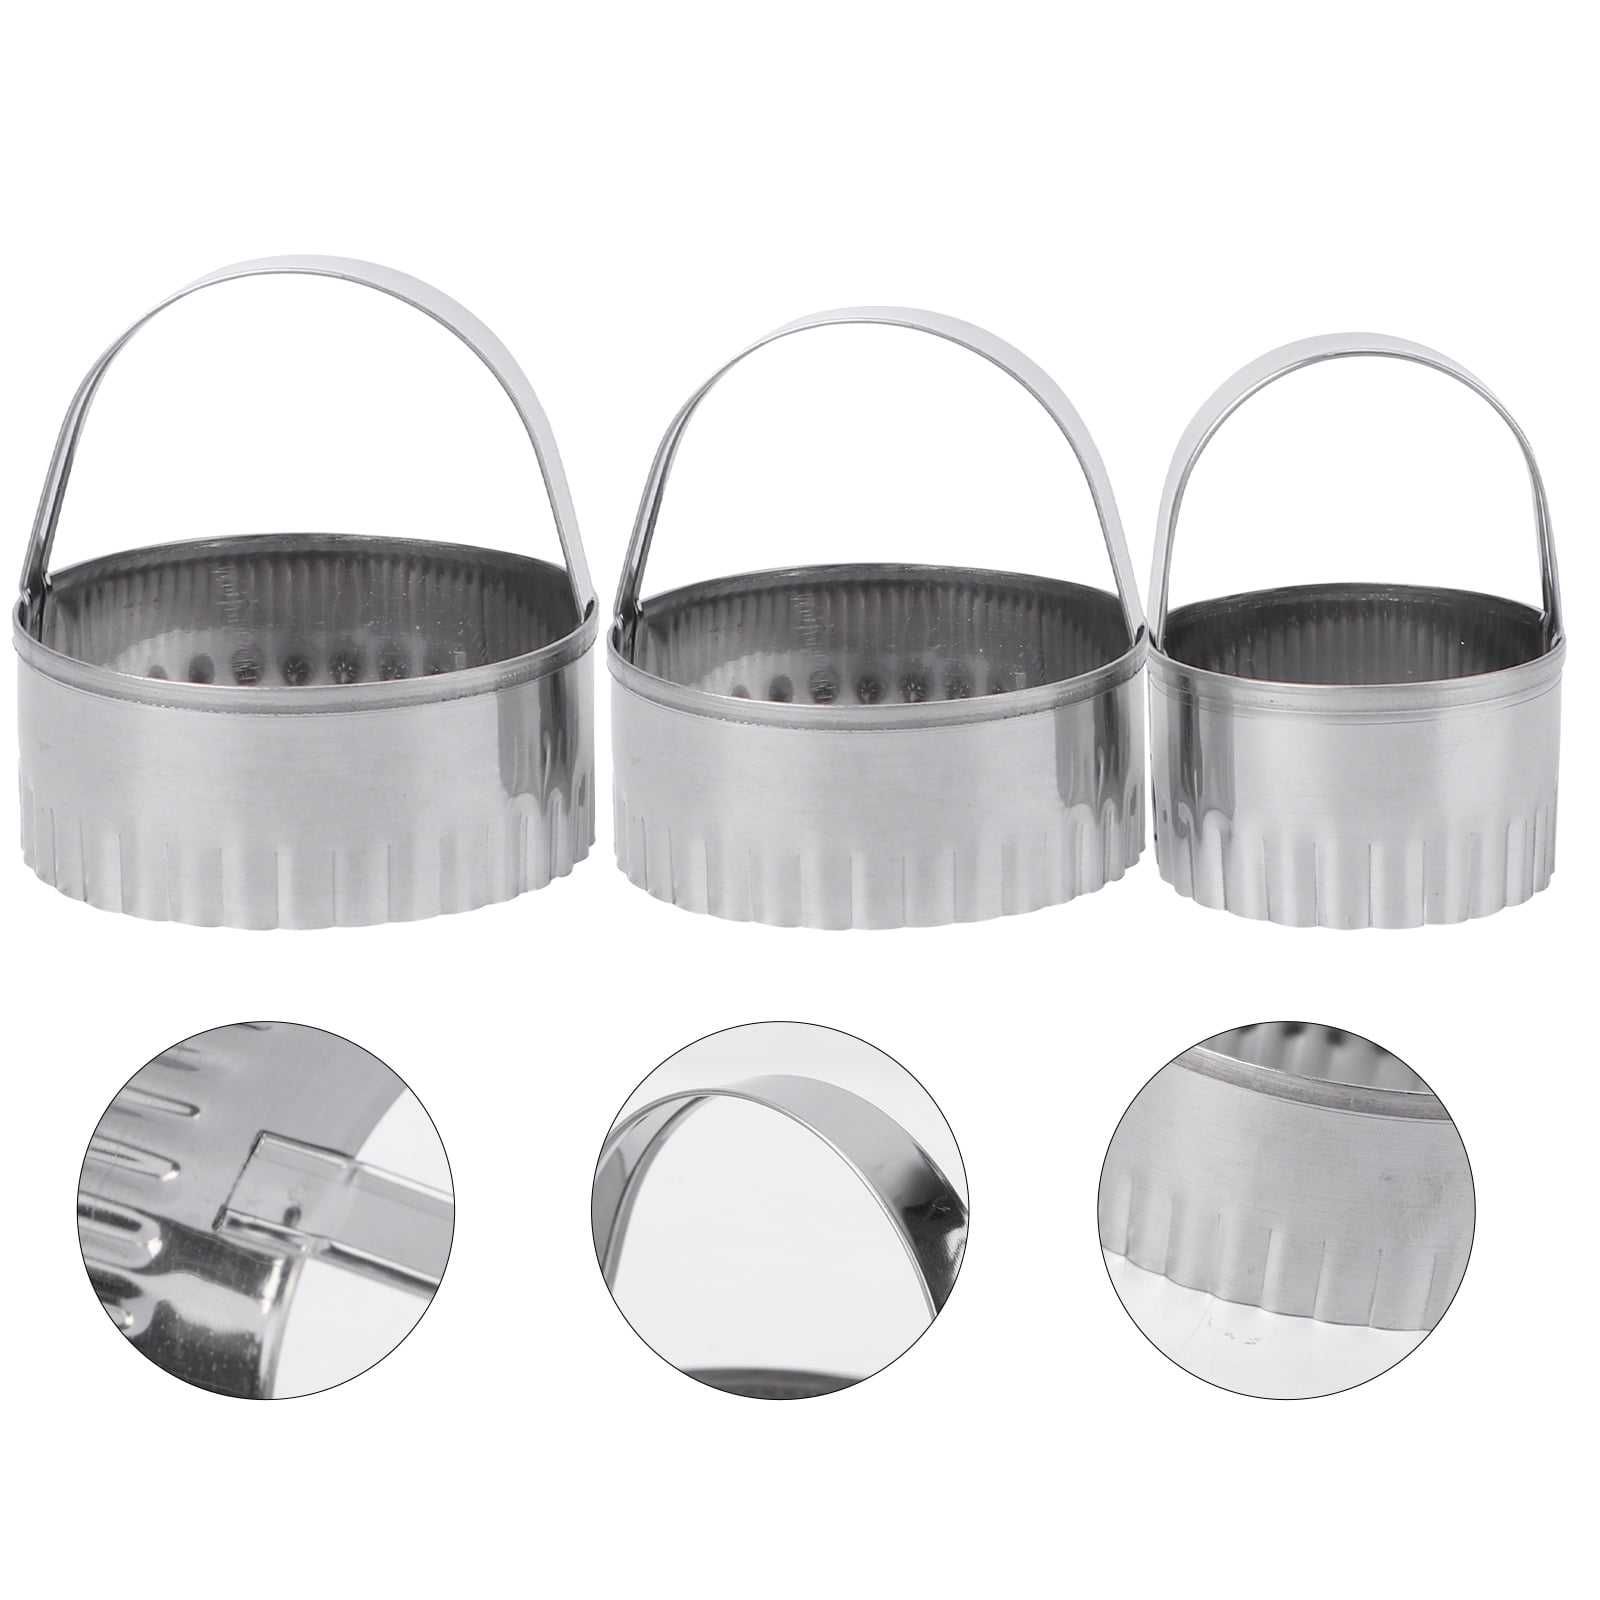  Stainless Steel Biscuit Cutters Set (5 Pieces/Set), Fluted  Round Cookies Cutter with Handle